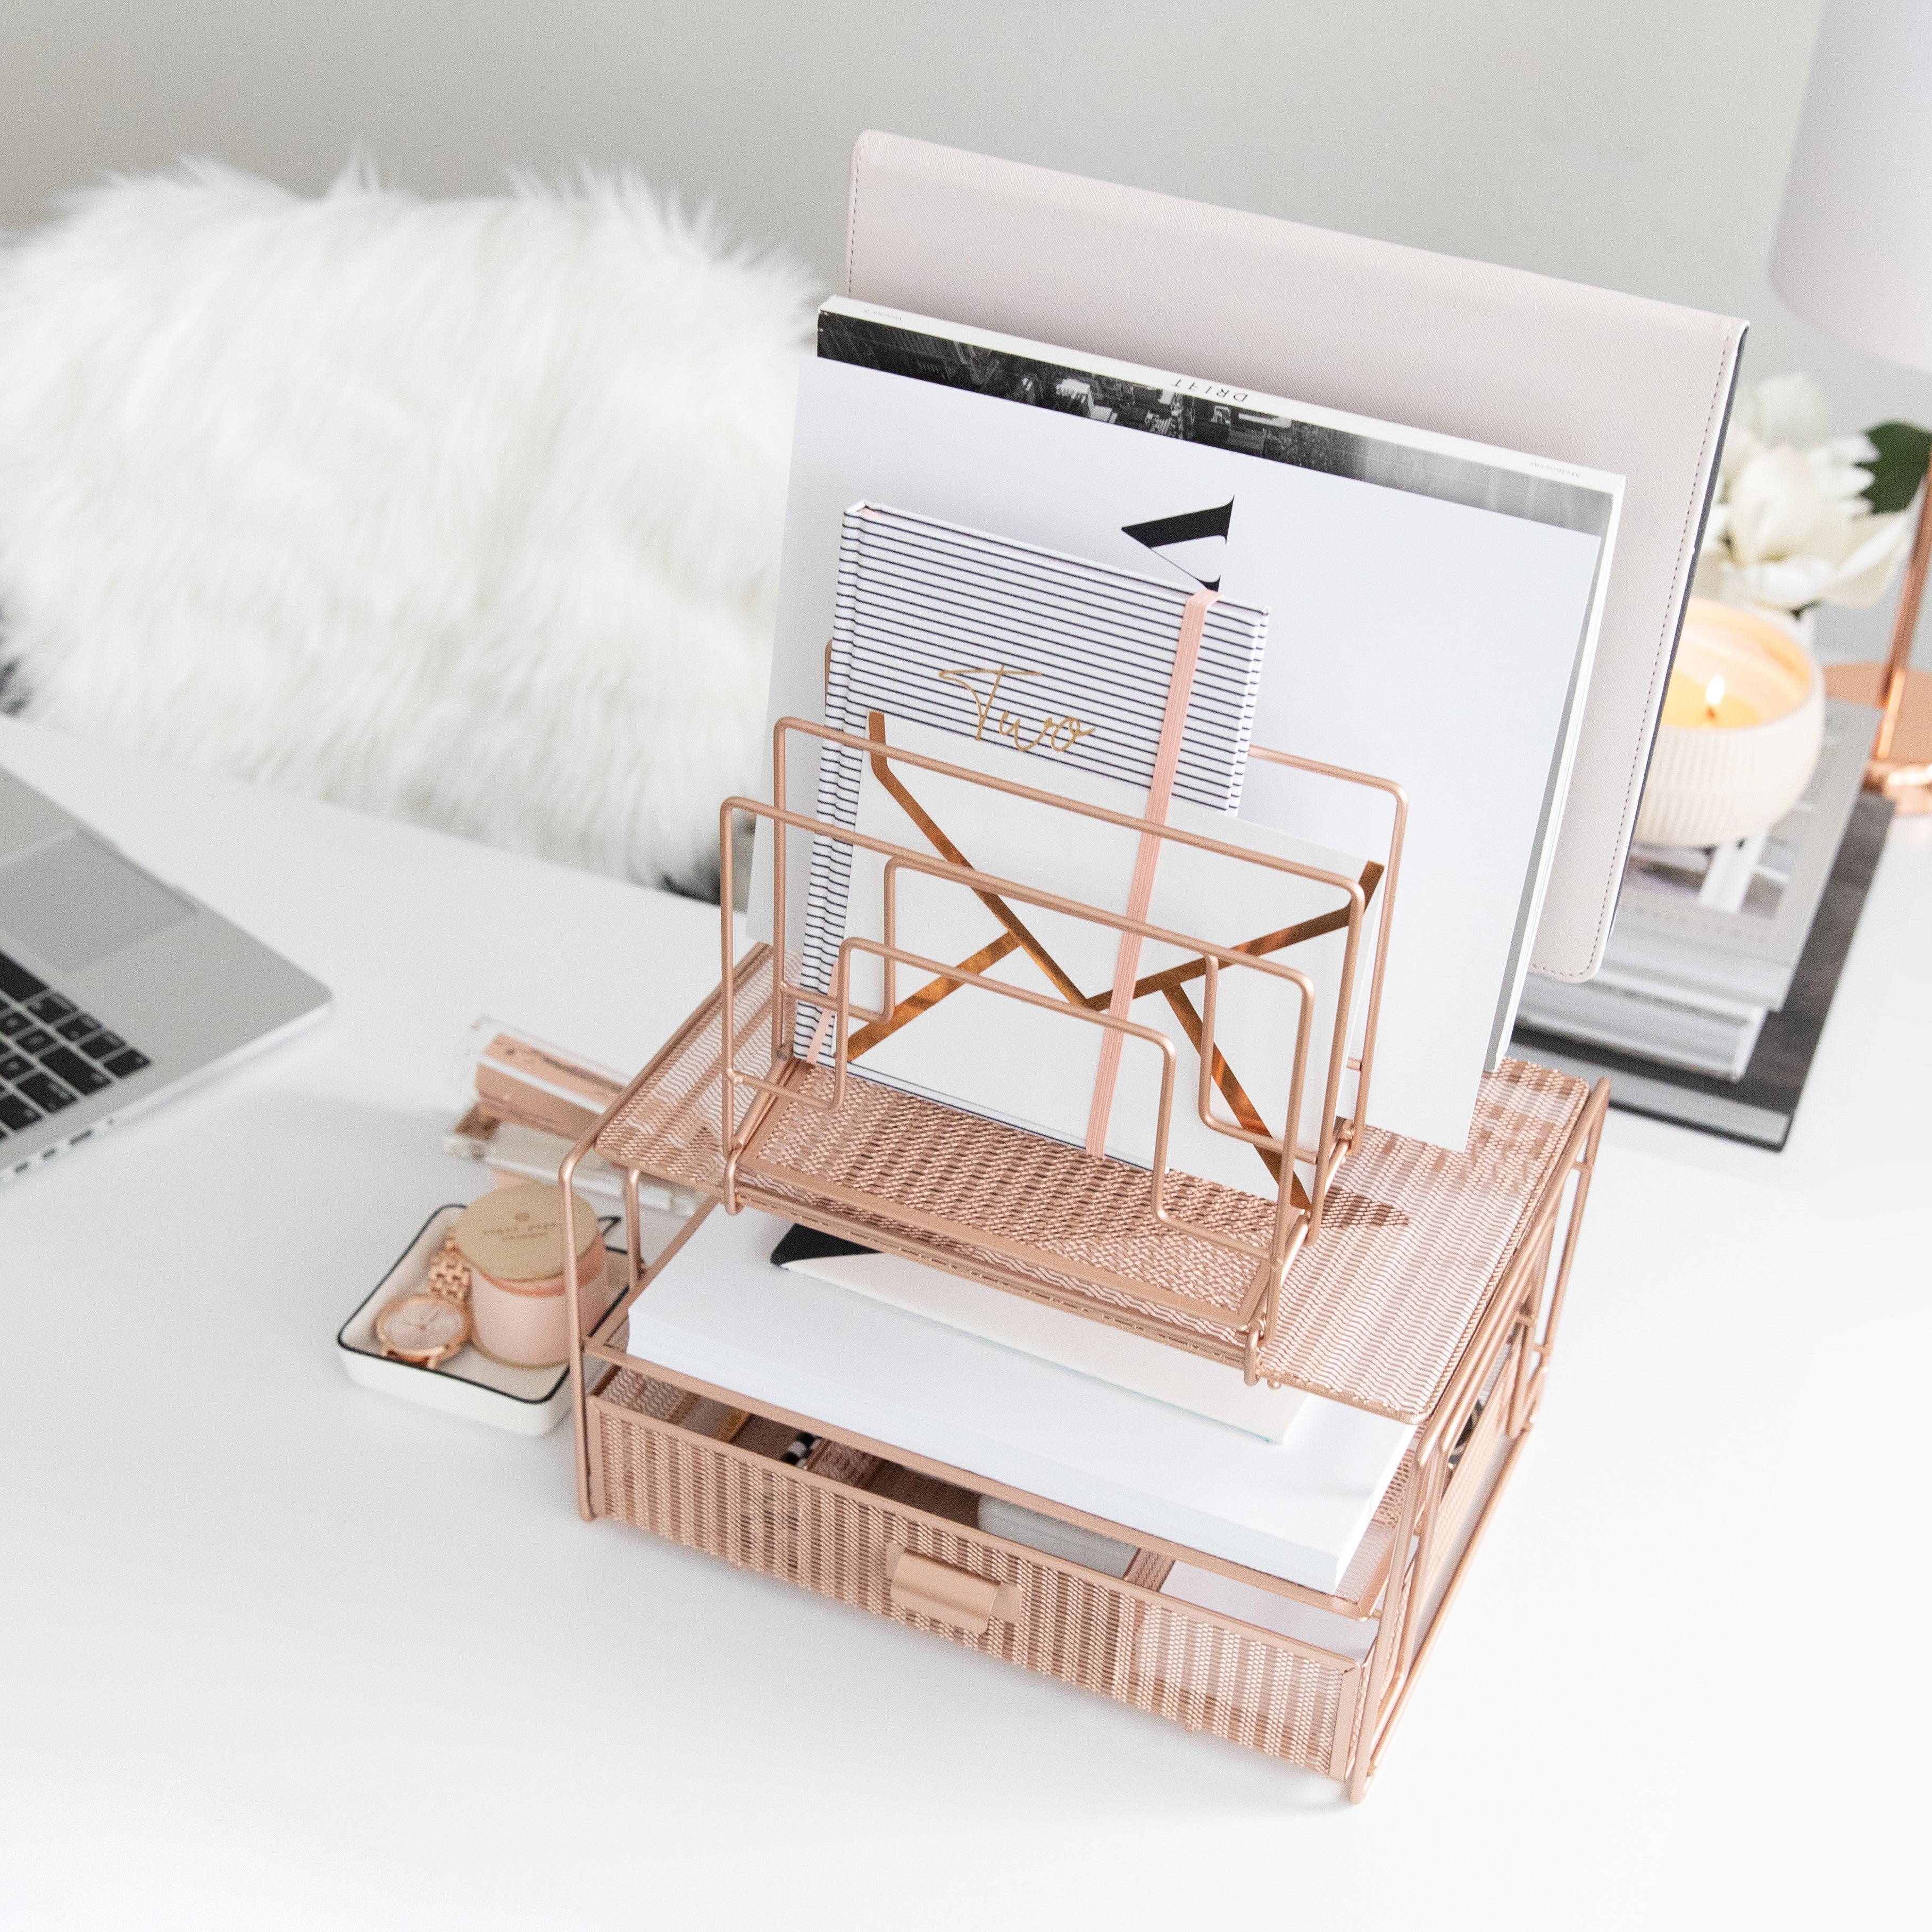 BLU MONACO Gold Desk Accessories and Workspace, Desktop Organizer - Cute  File Organizer for Desk and Drawer Storage for Office Supplies, Paper,  Device